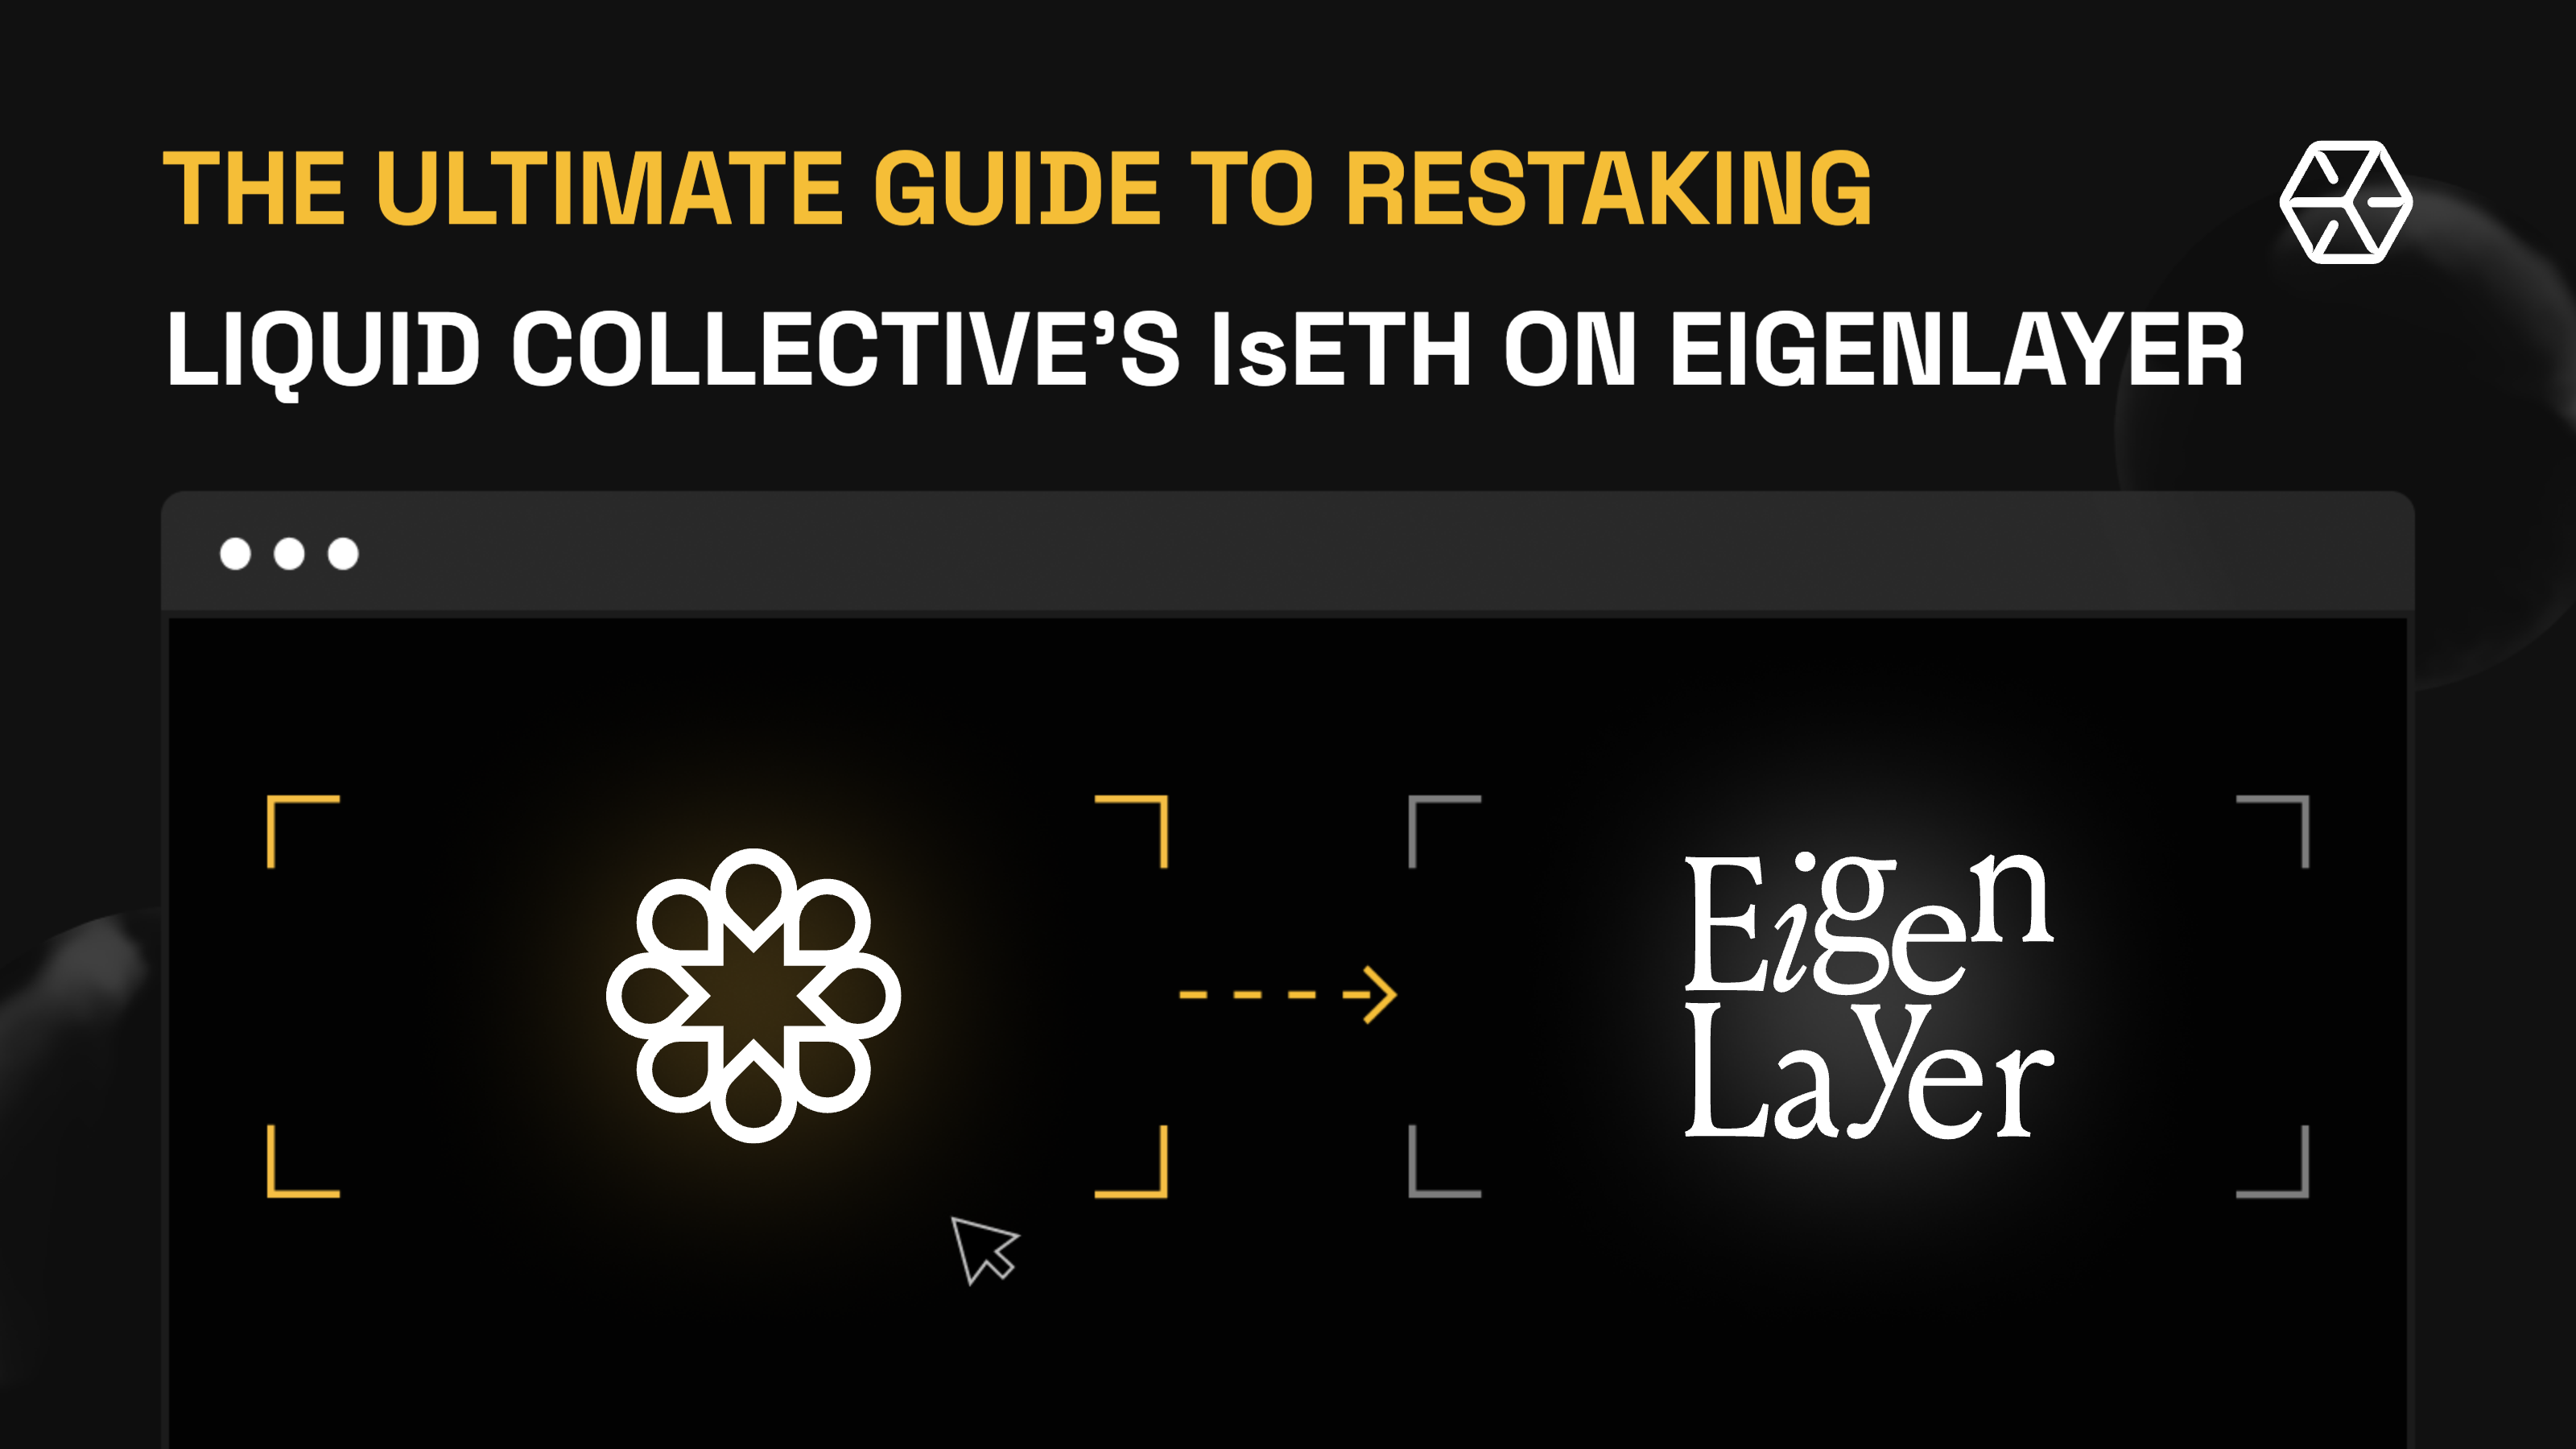 How to Restake and Delegate Liquid Collective’s LST on EigenLayer: a Step-by-Step Guide